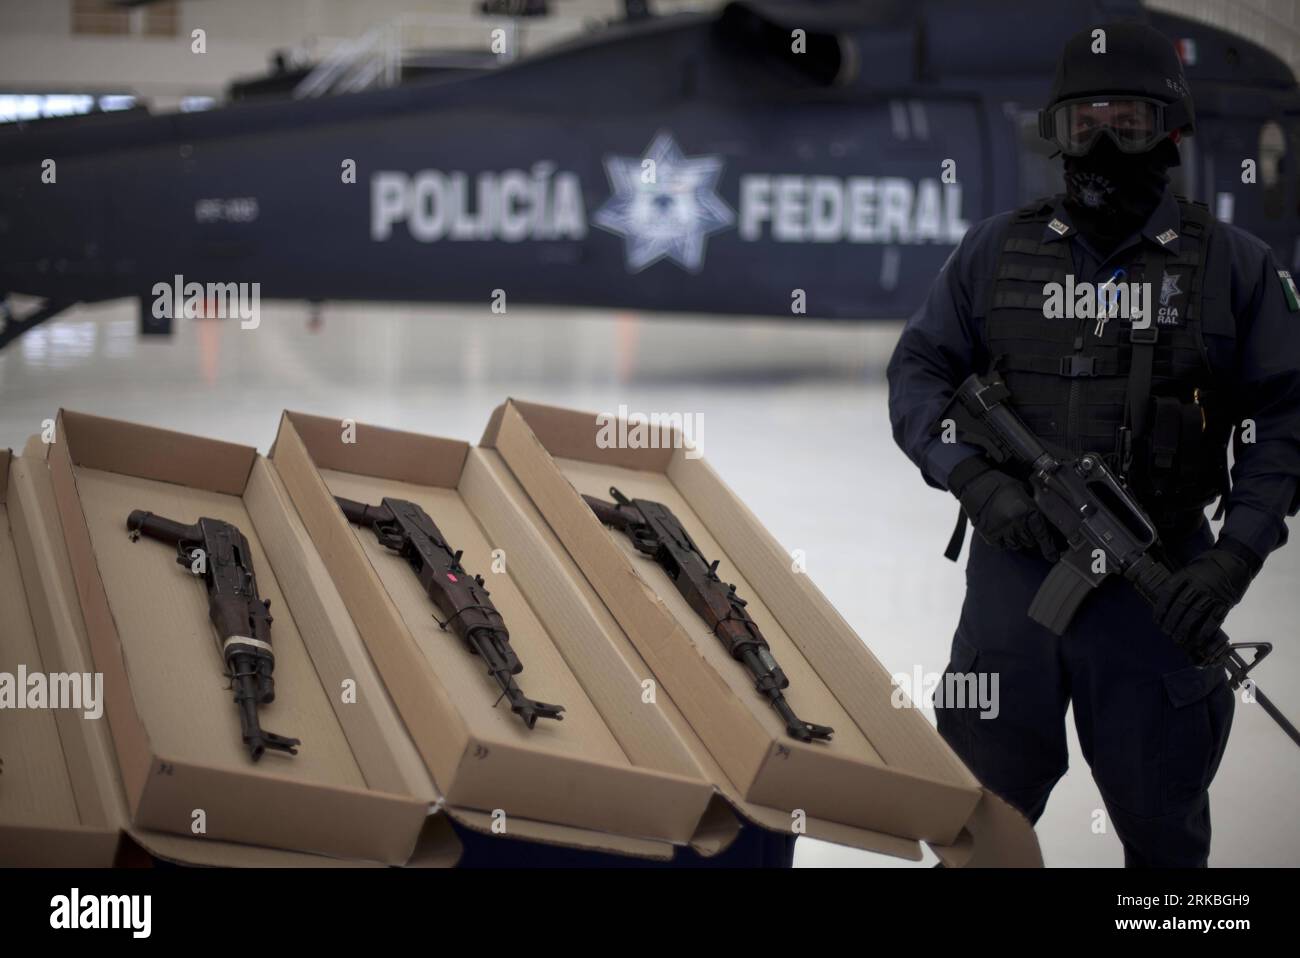 Bildnummer: 54558214  Datum: 22.10.2010  Copyright: imago/Xinhua (101022) -- MEXICO CITY, Oct. 22, 2010 (Xinhua) -- A policeman stands guard as some of the weapons seized from two members of the drug cartel Los Zetas are shown to the press in Mexico City, on Oct. 22, 2010. Mexican police arrested Margarito Mendoza Lopez and Carmen Zuniga Arcia, members of the drug cartel the Los Zetas in Tabasco, south of Mexico, and seized 73 weapons, 2275 bullet cartridges and 2 kilograms of cocaine. (Xinhua/Jorge Dan Lopez) (zw) MEXICO-DRUG-CRIME-ARREST PUBLICATIONxNOTxINxCHN Gesellschaft Polizei Waffen Prä Stock Photo